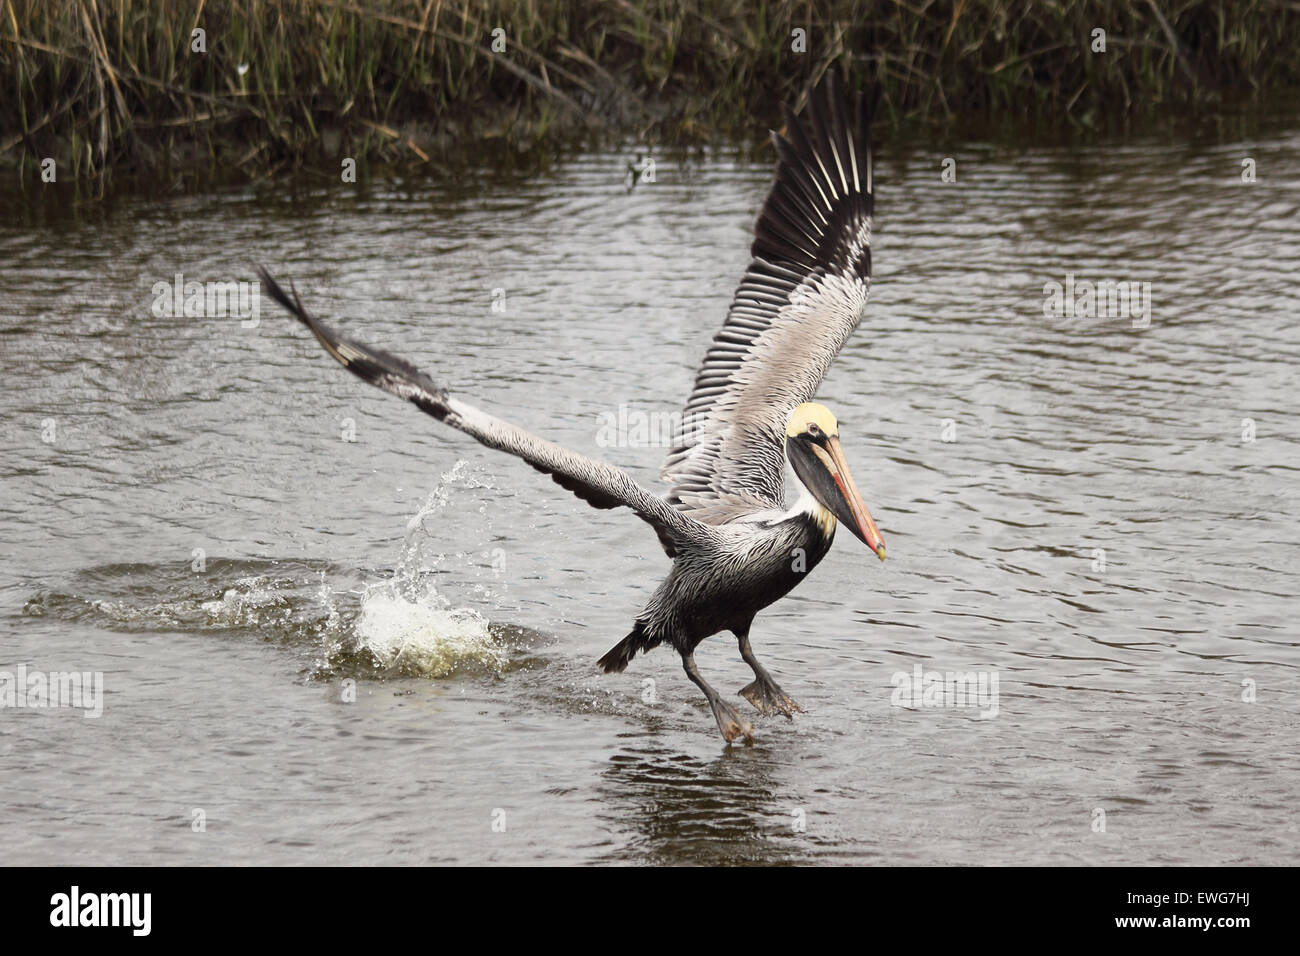 A male Brown pelican takes off from a coastal estuary. Stock Photo